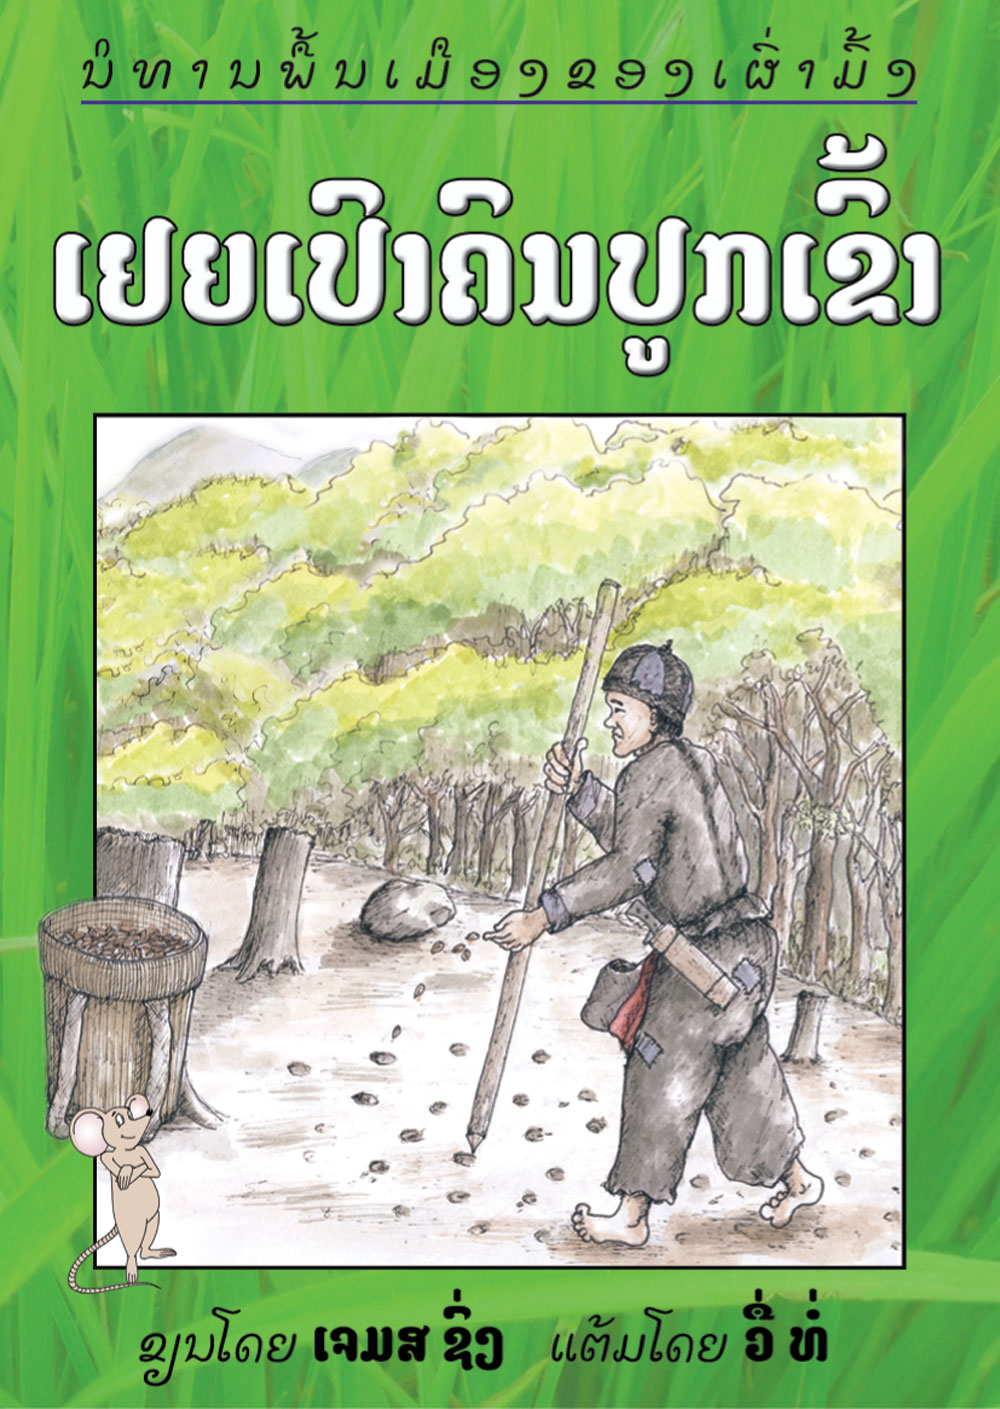 Farmer Yia Pao large book cover, published in Lao language